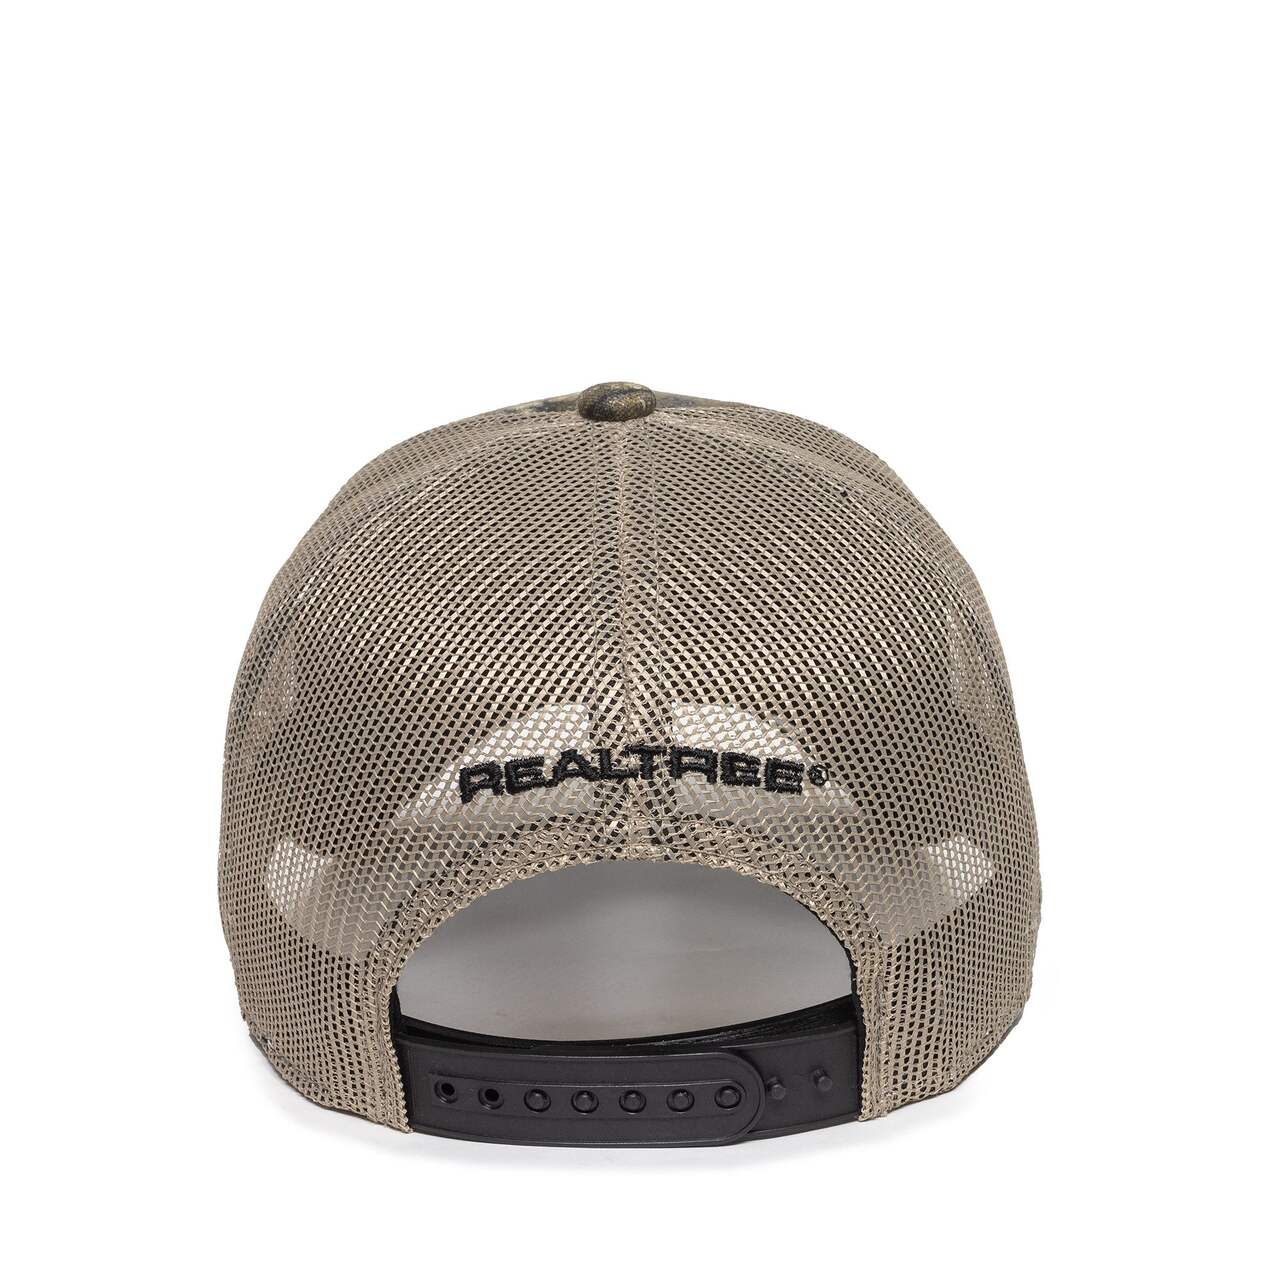 Realtree Structured Baseball Style Hat, Charcoal/Black, Large